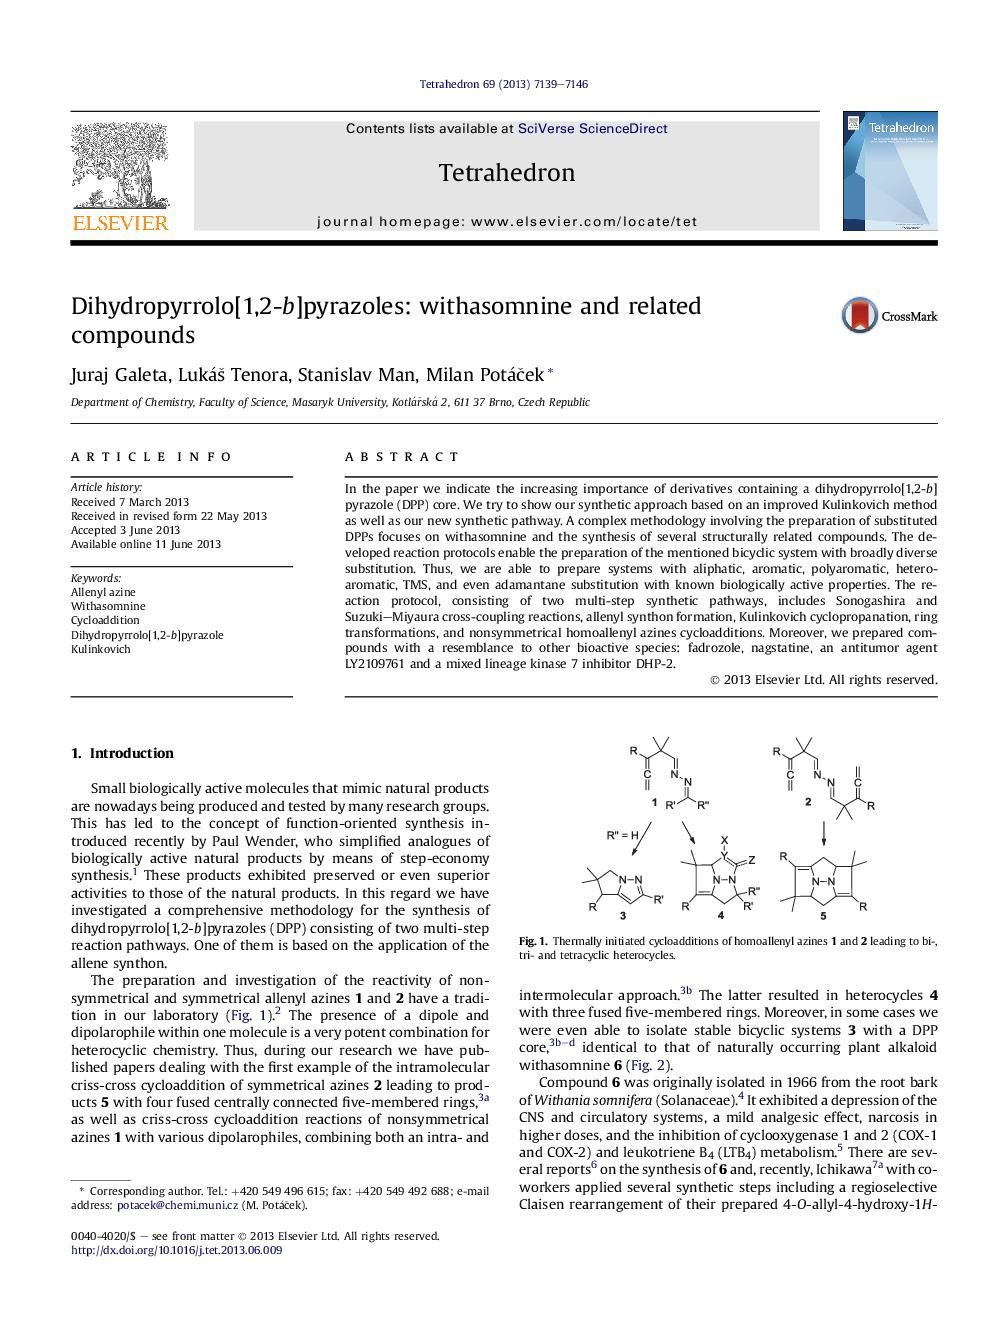 Dihydropyrrolo[1,2-b]pyrazoles: withasomnine and related compounds